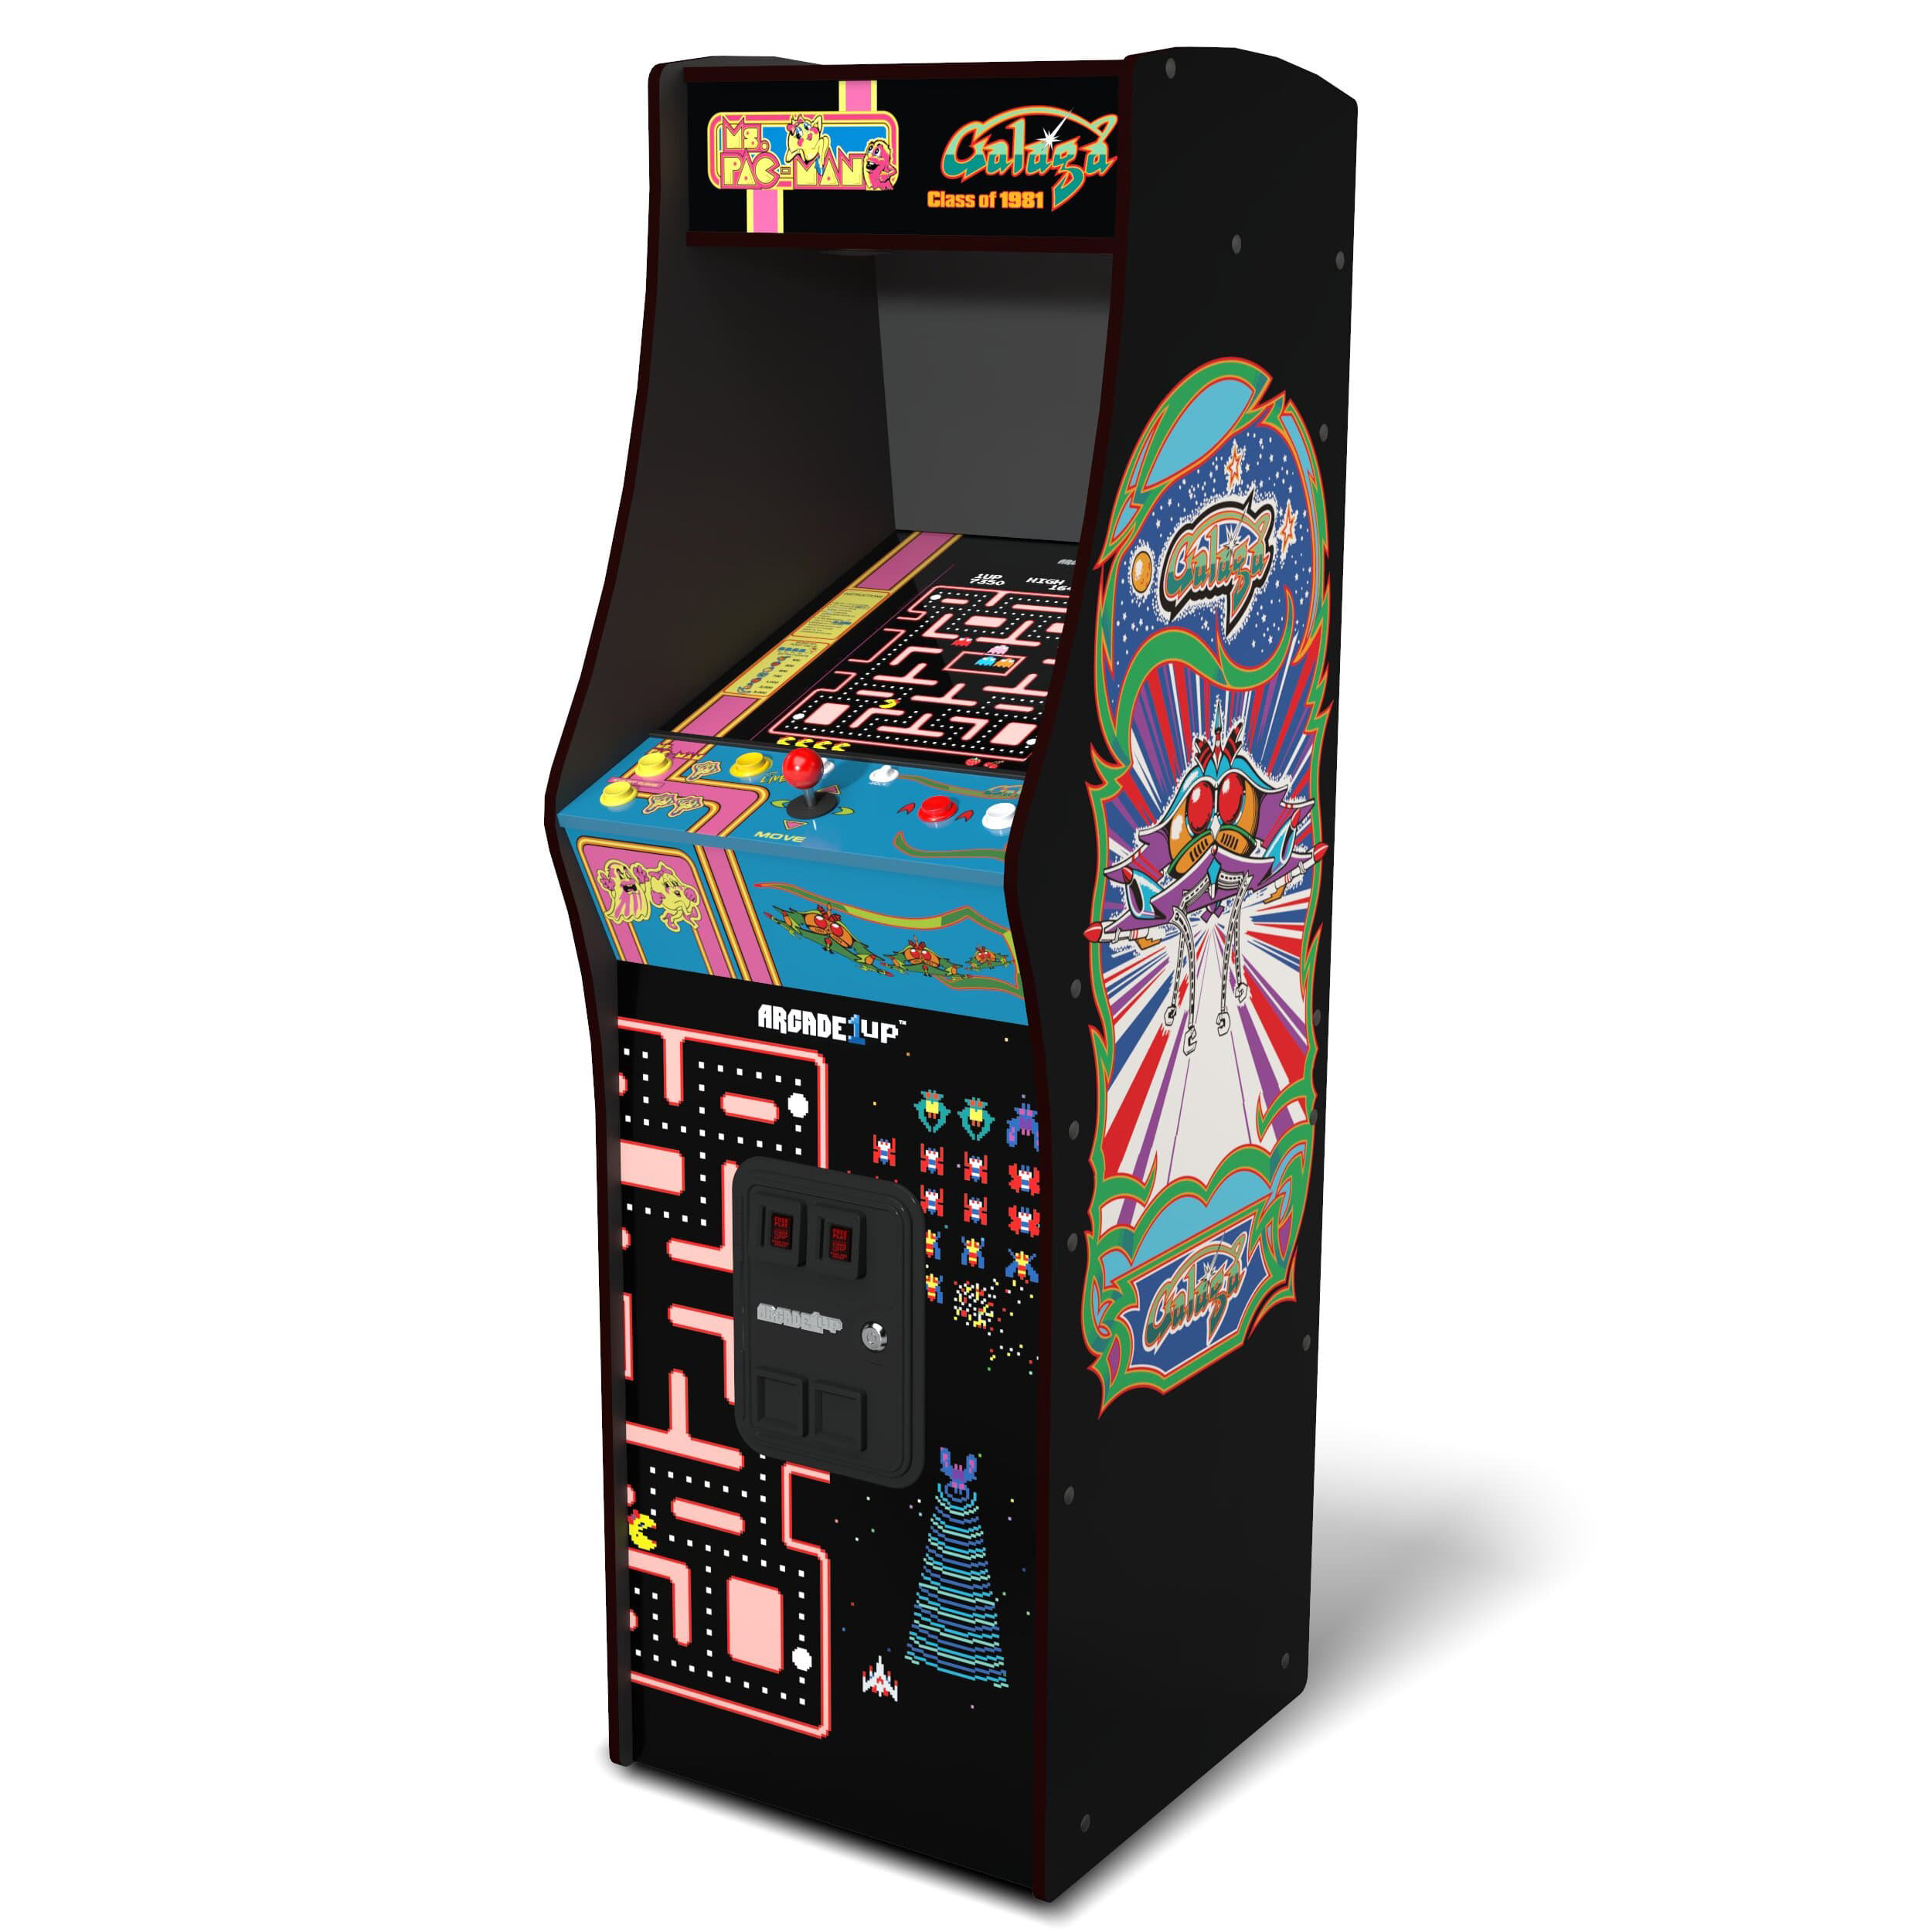 Arcade 1UP Pac-Man Legacy Arcade Delux Edition Video Game